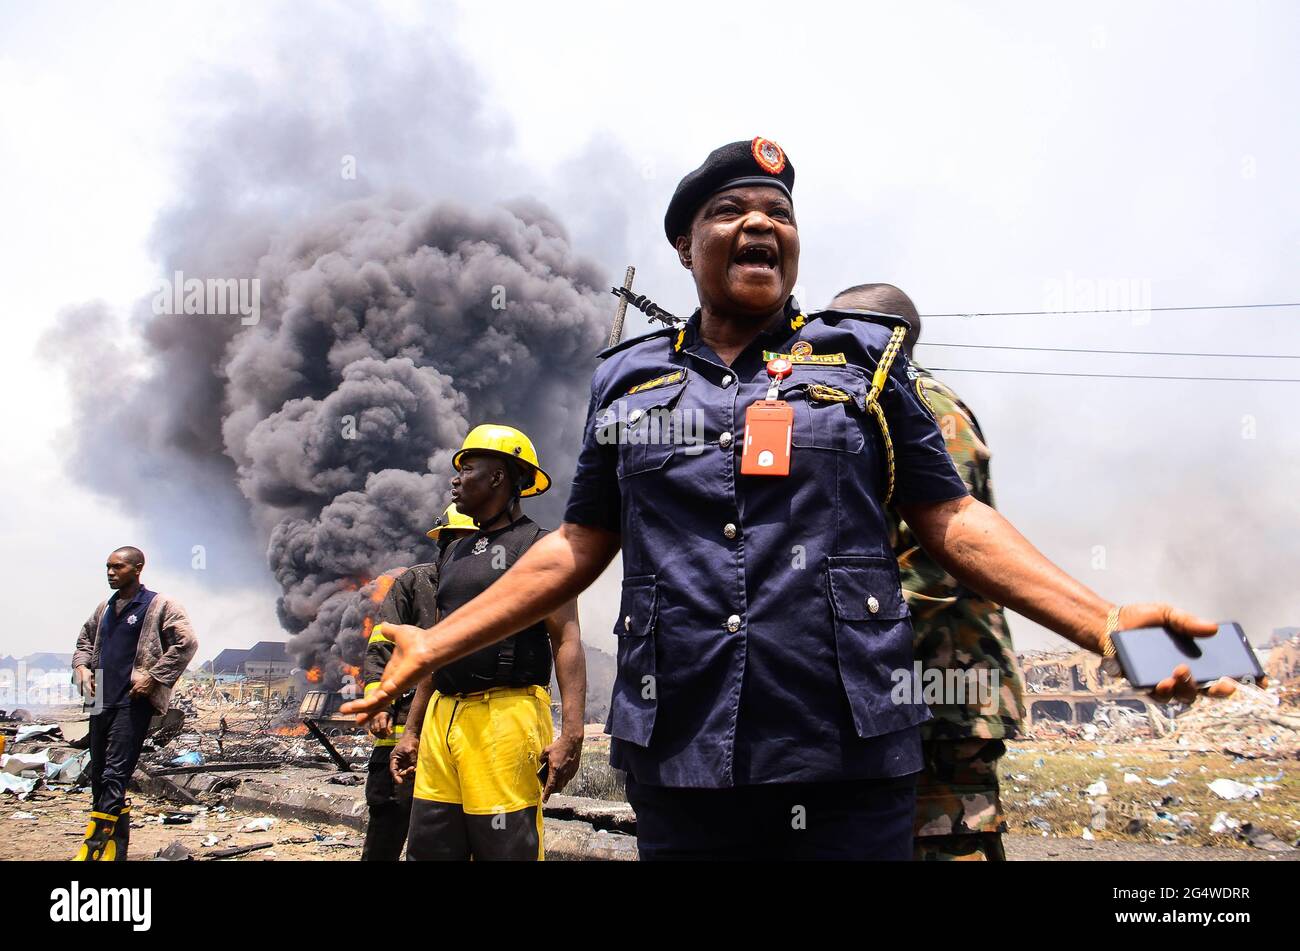 A woman with the Nigeria Security and Civil Defense Corps reacts at the scene of a gas explosion. A gas explosion rocked the Abule-Ado area killing at least 15 people, injured many more and destroyed around 50 buildings. Nigeria. Stock Photo